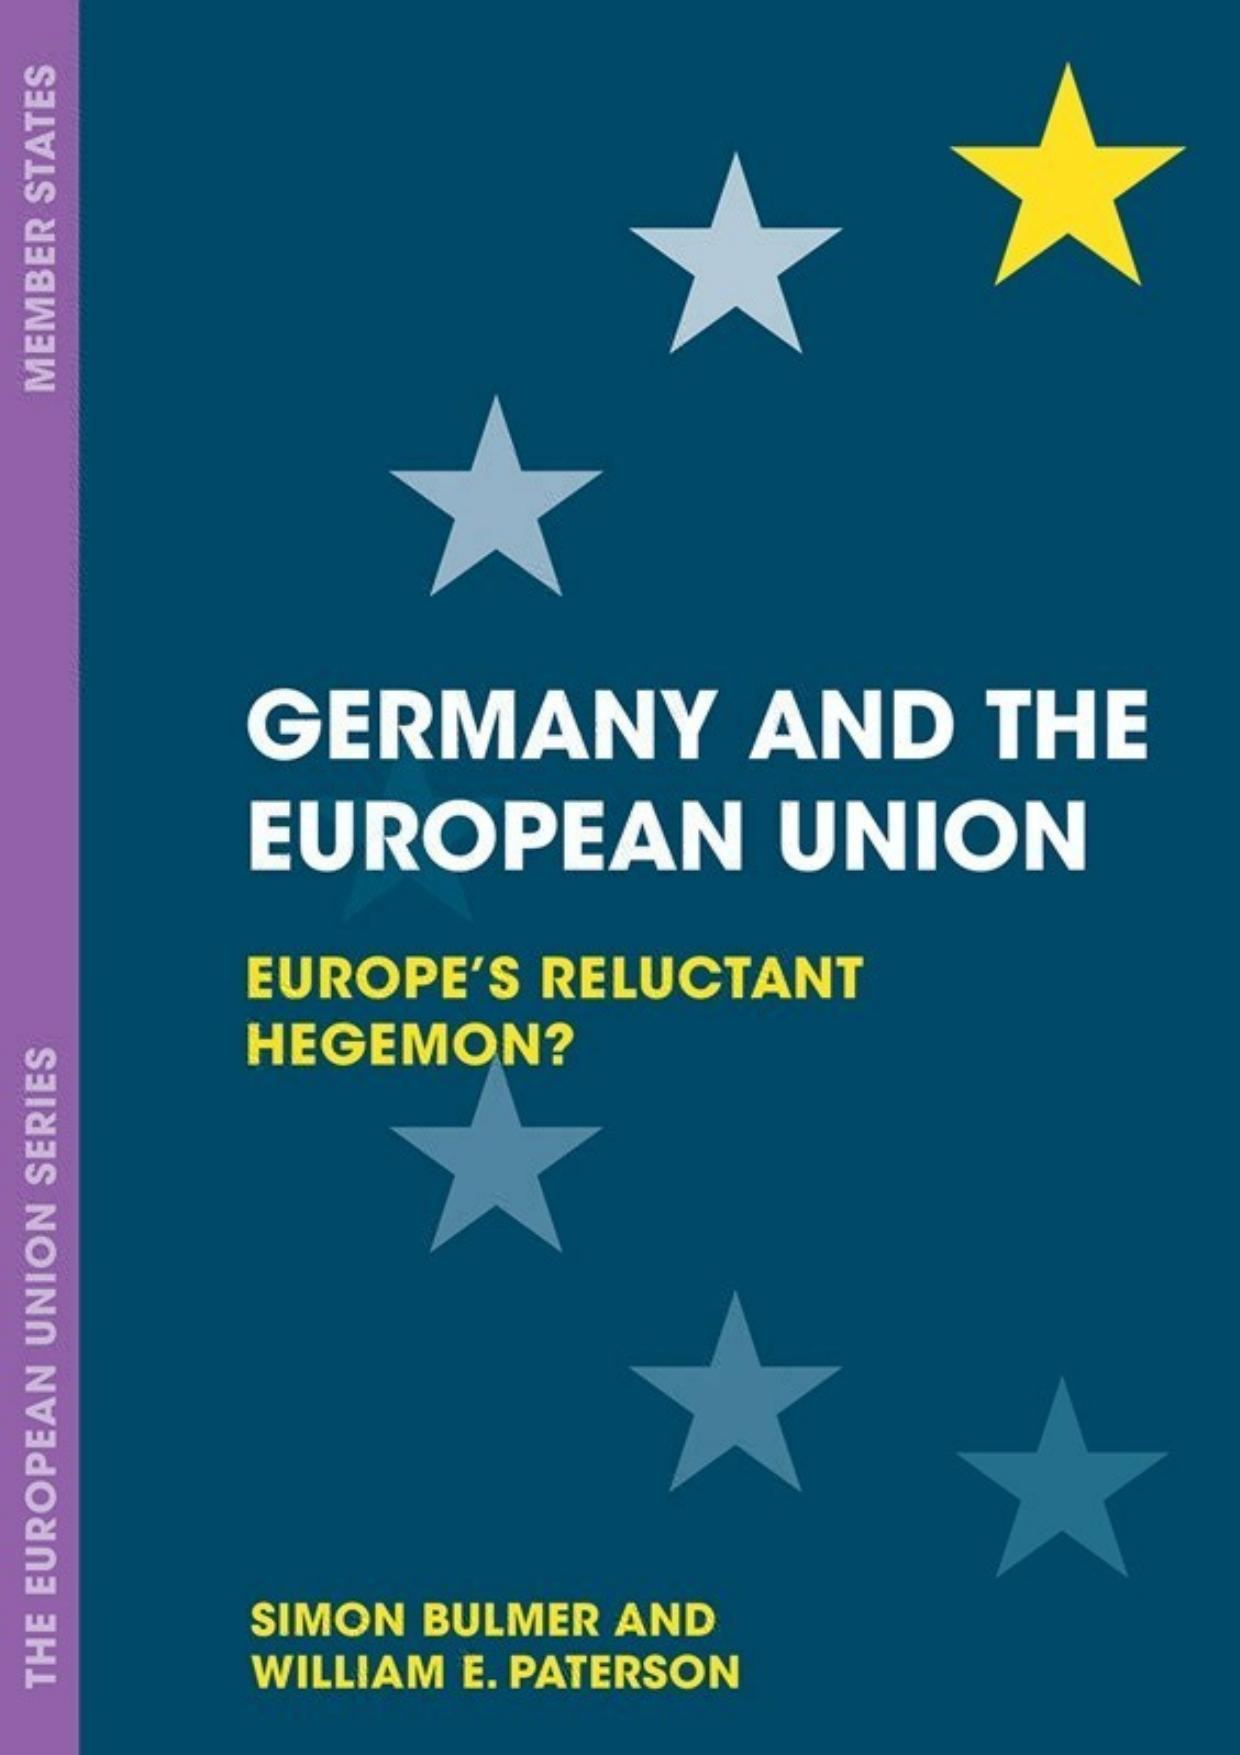 (eBook PDF)Germany and the European Union Europe s Reluctant Hegemon  by Simon Bulmer & William E. Paterson